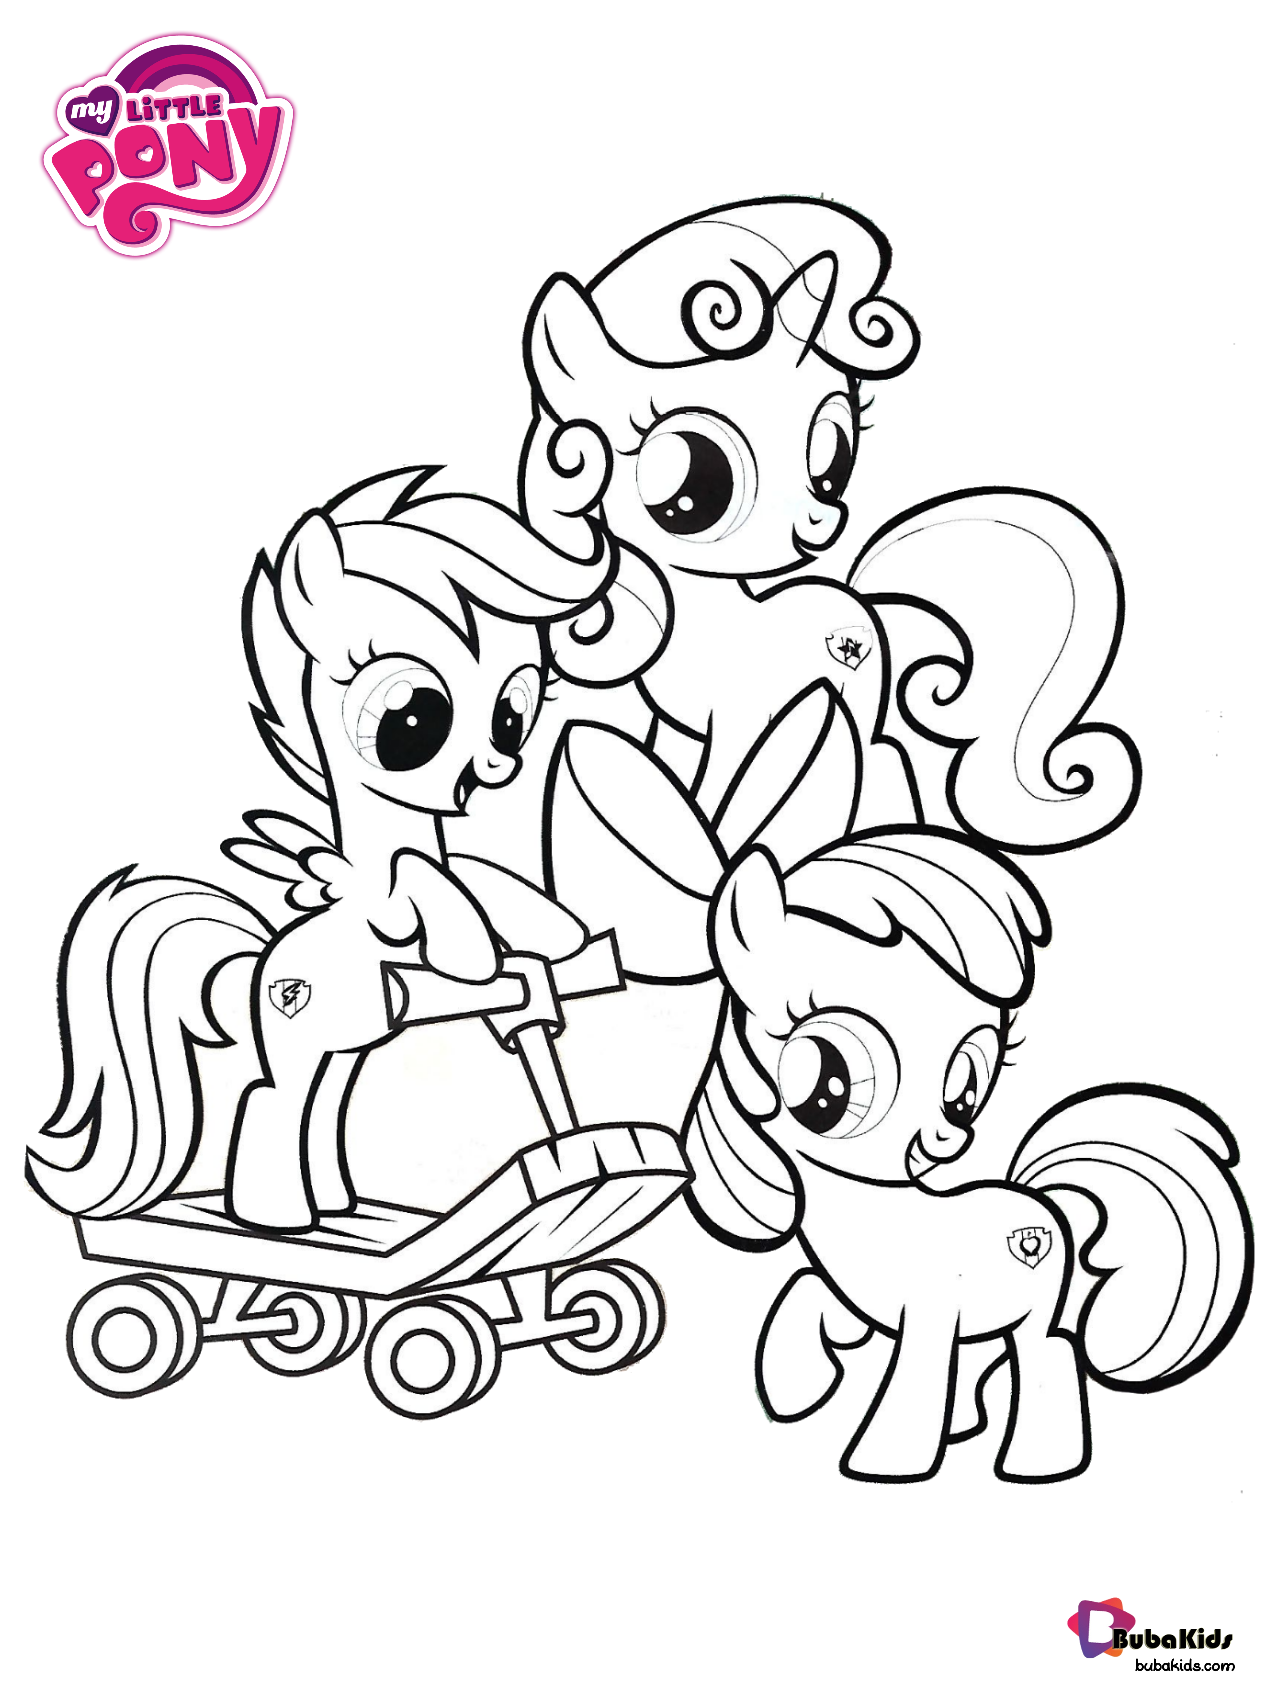 Free download My Little Pony Best Of Cutie Mark Crusaders Printable Coloring Pages. Wallpaper